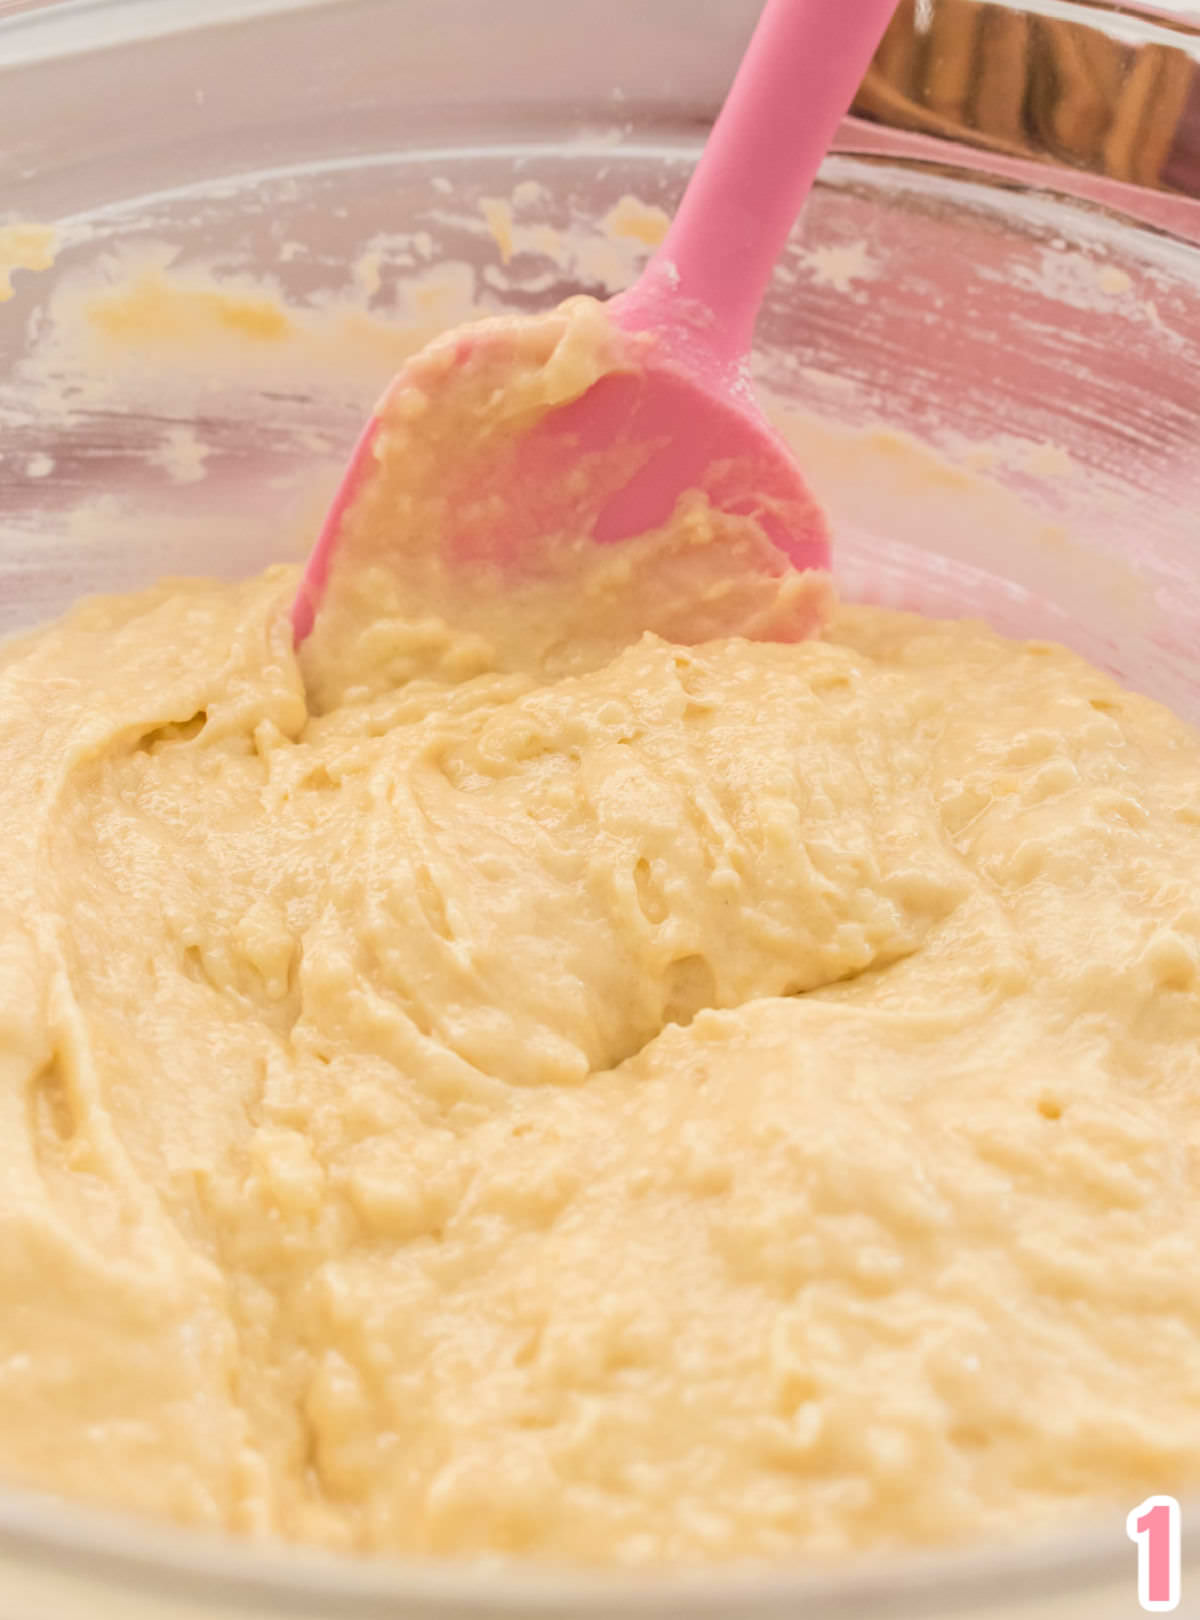 Close up image of the cake batter in a glass bowl with a pink spatula.